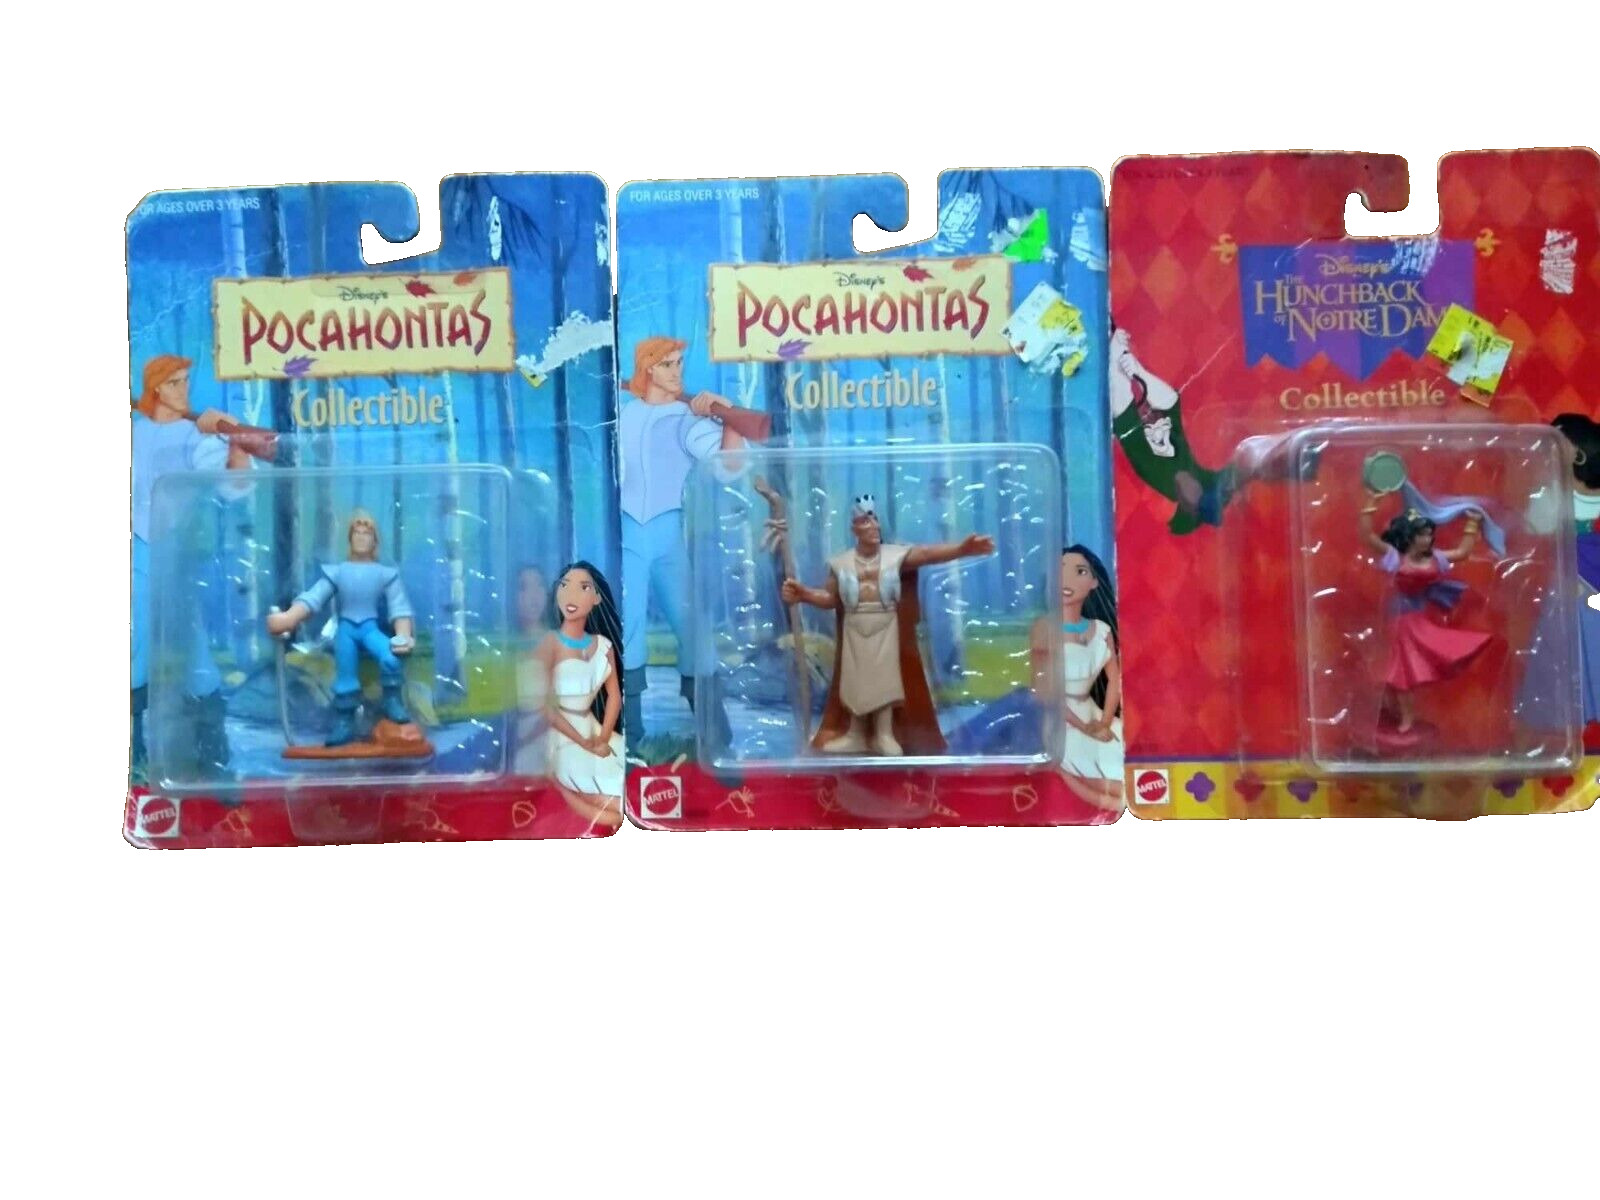 Vintage Disney Pocahontas Collectibles Lot of 3 still in Box Plus Hunchback